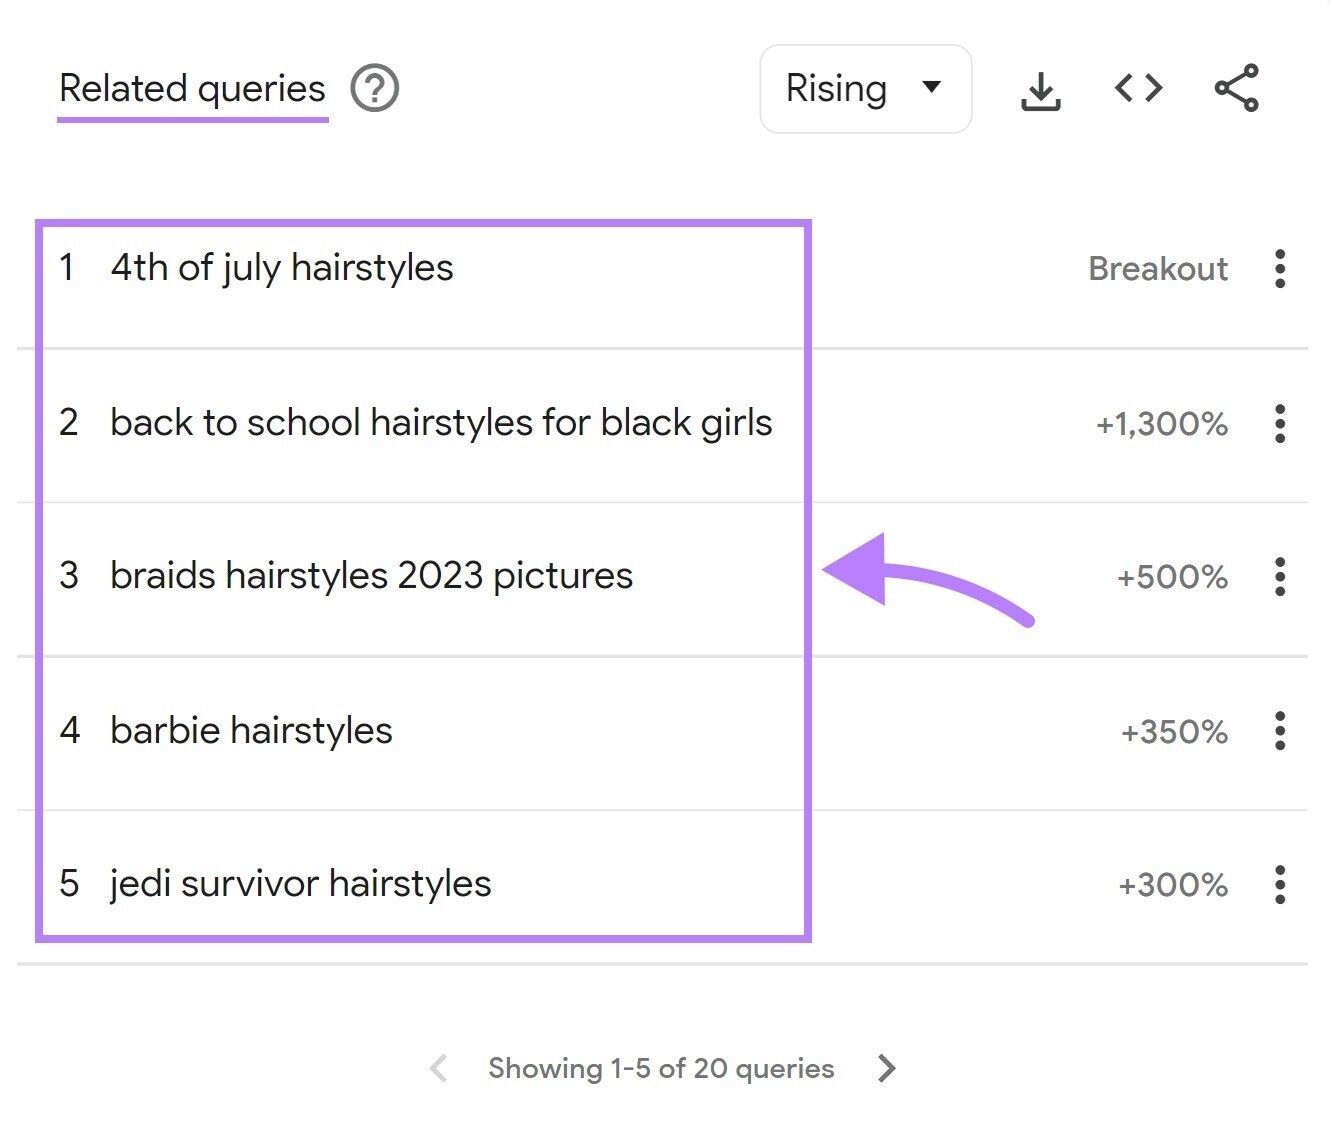 Related queries for the term “hairstyles” in the U.S.